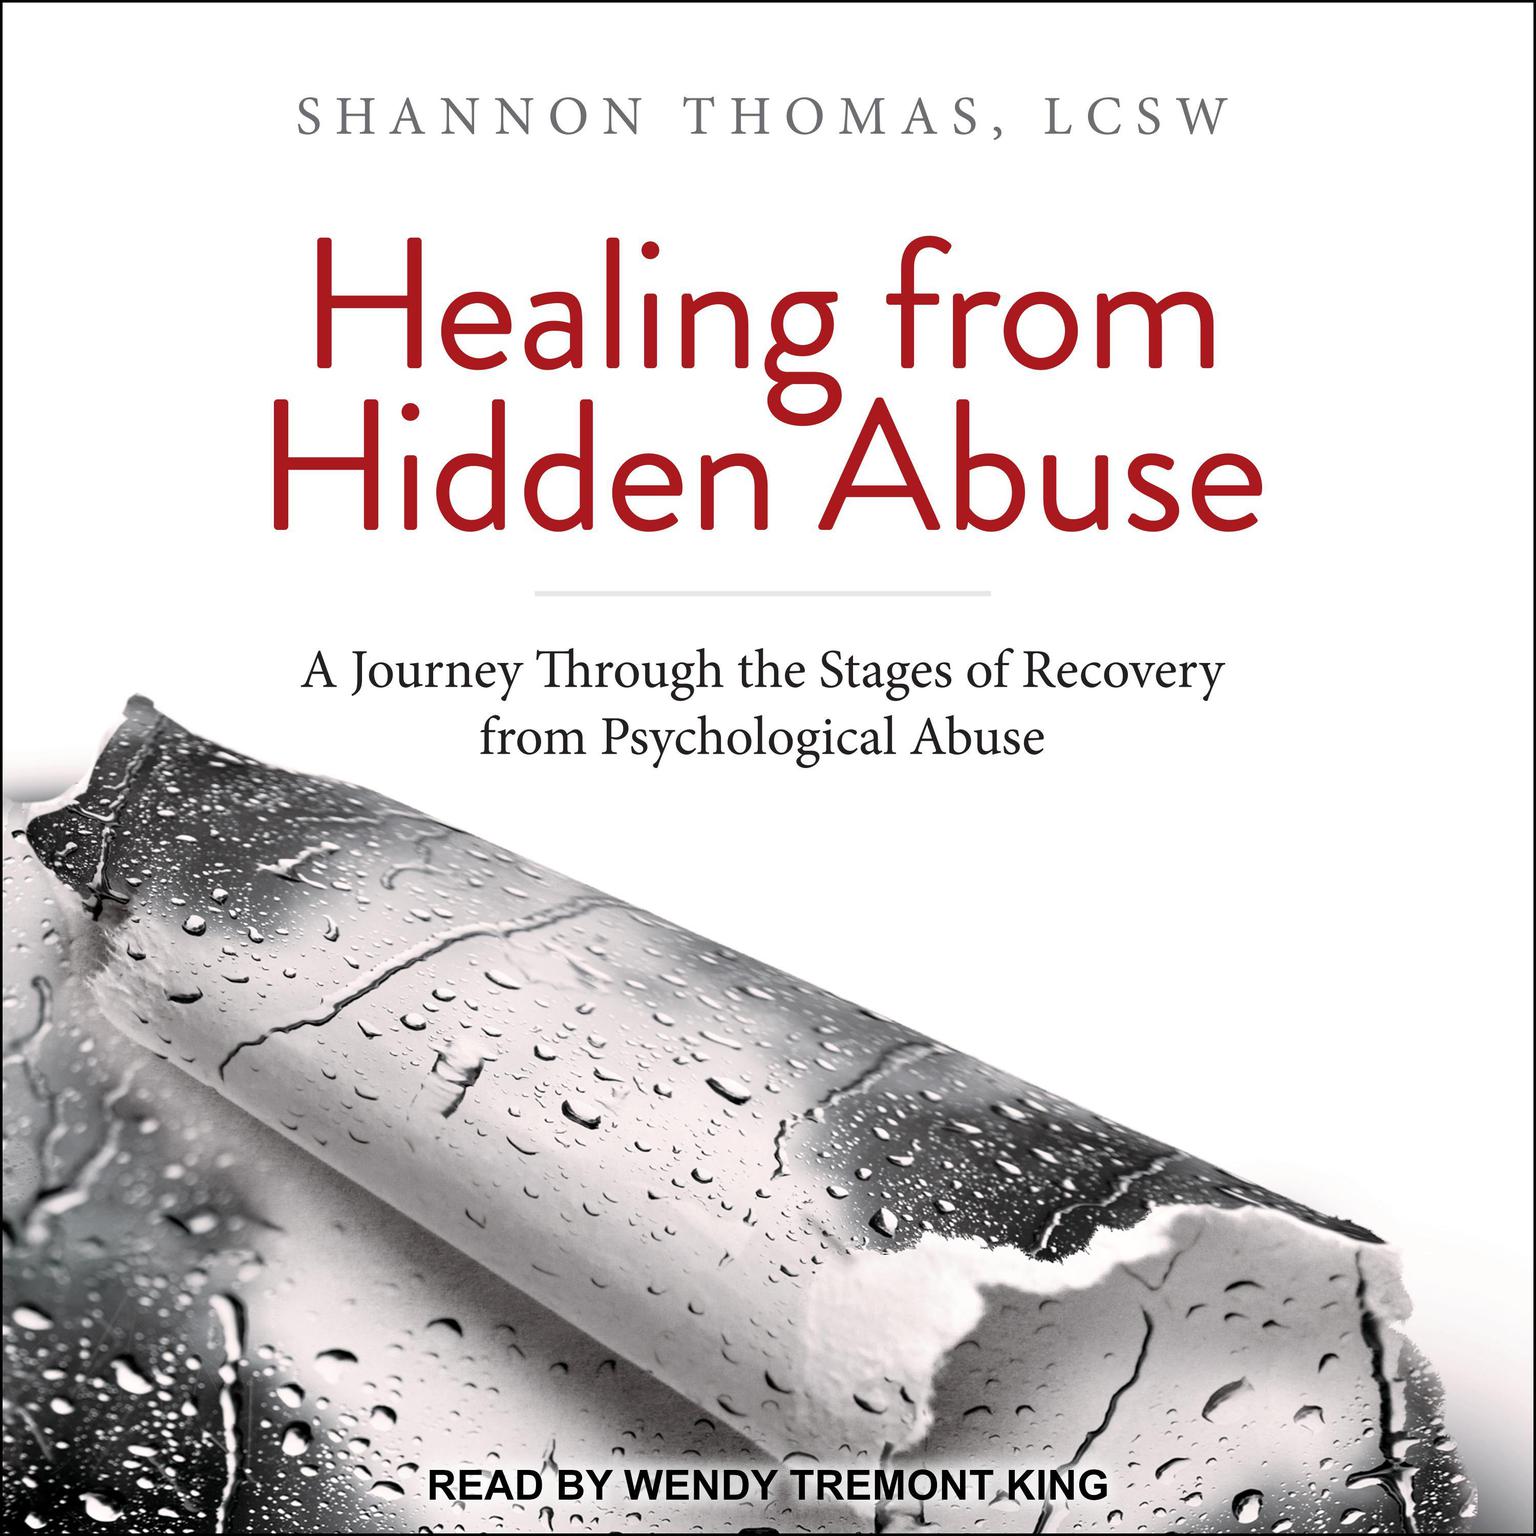 Healing from Hidden Abuse: A Journey Through the Stages of Recovery from Psychological Abuse Audiobook, by Shannon Thomas LCSW